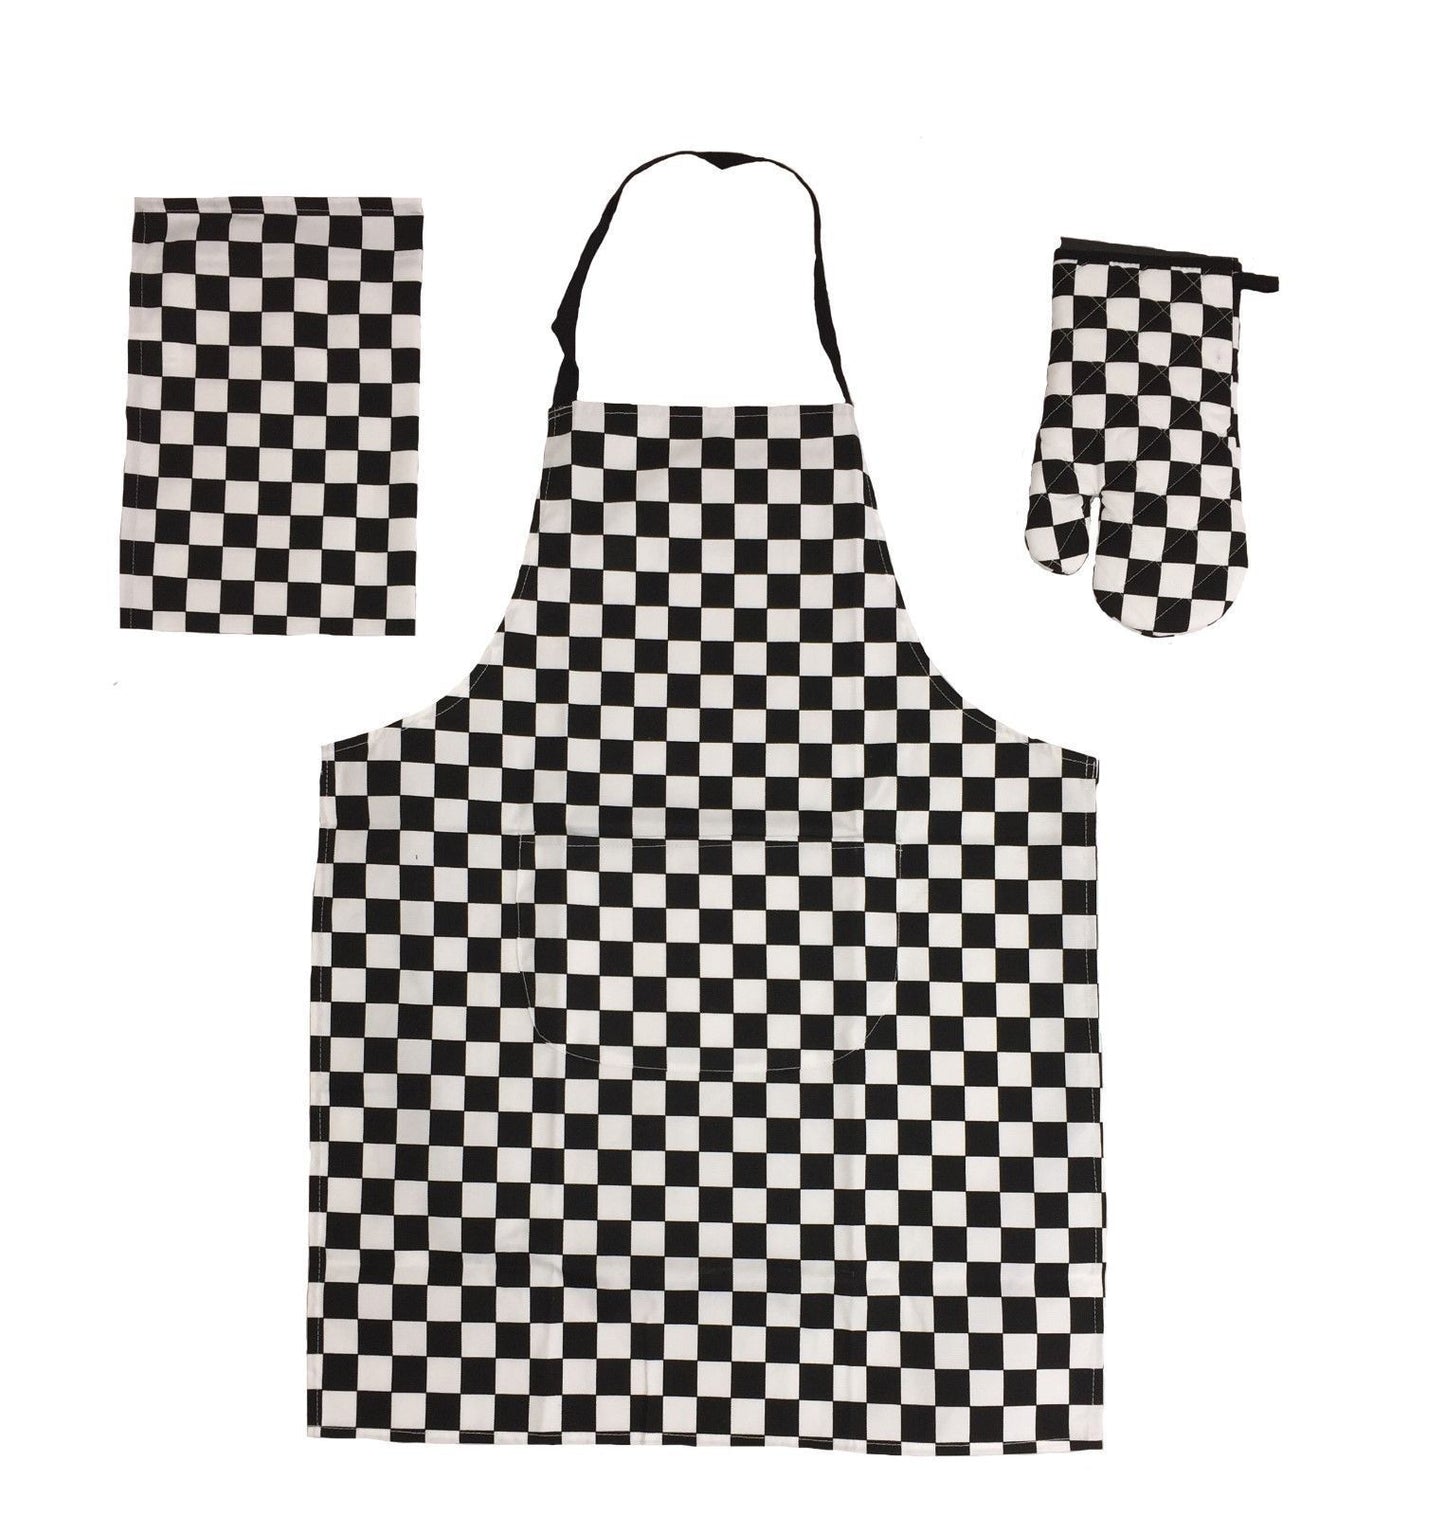 Mad About Cooking Set 3 Piece Chef Set Black White Checked Apron Tea Towel Gauntlet